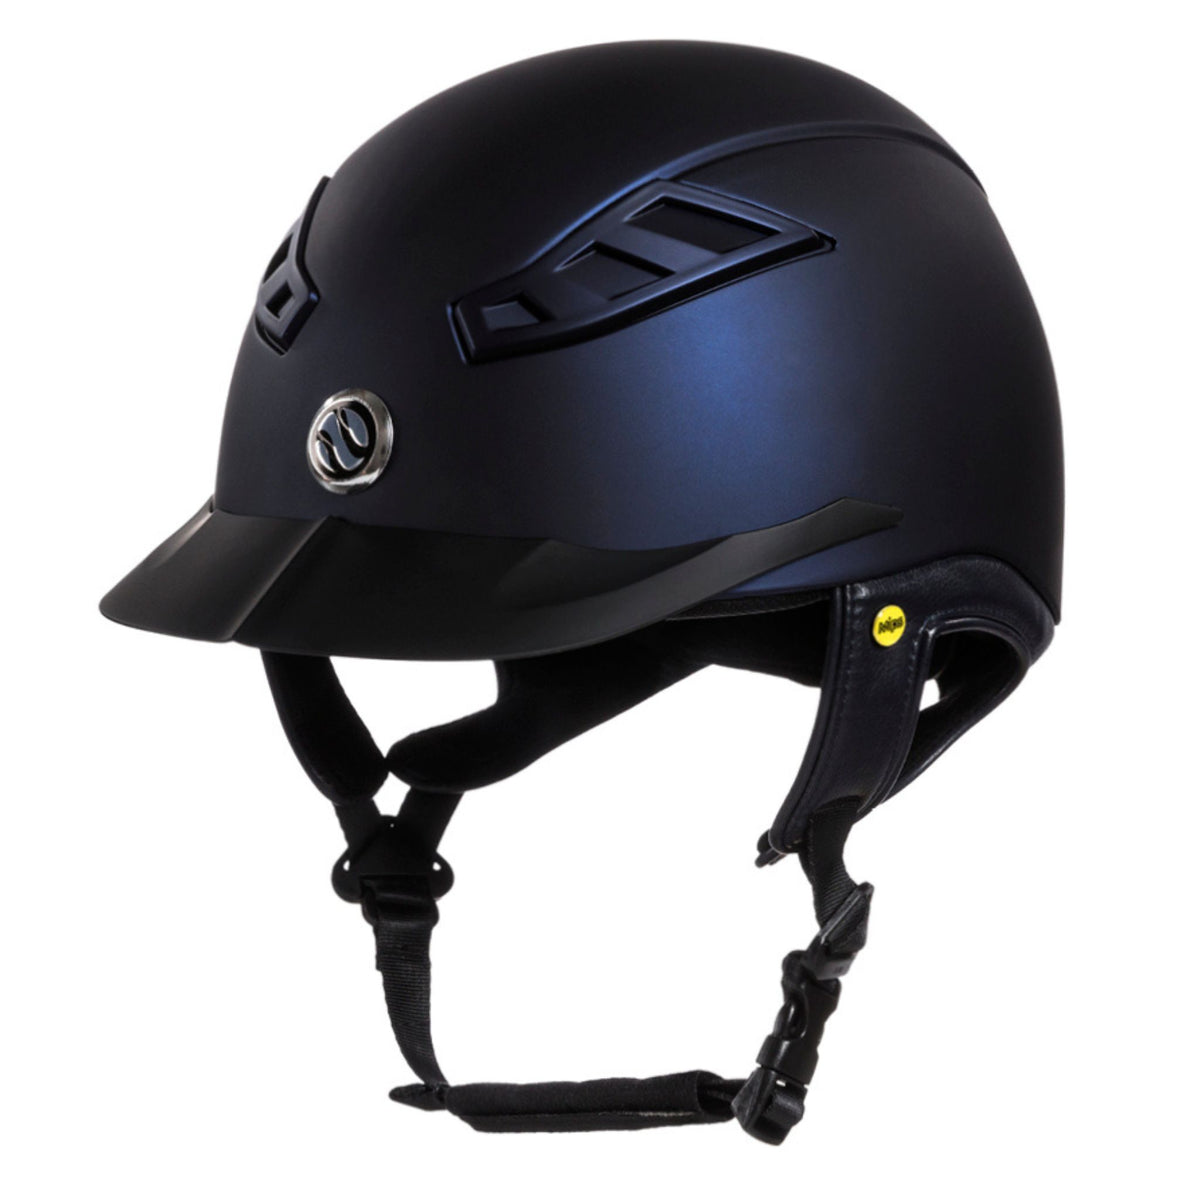 Blue helmet with leather ear straps and a durable plastic brim.